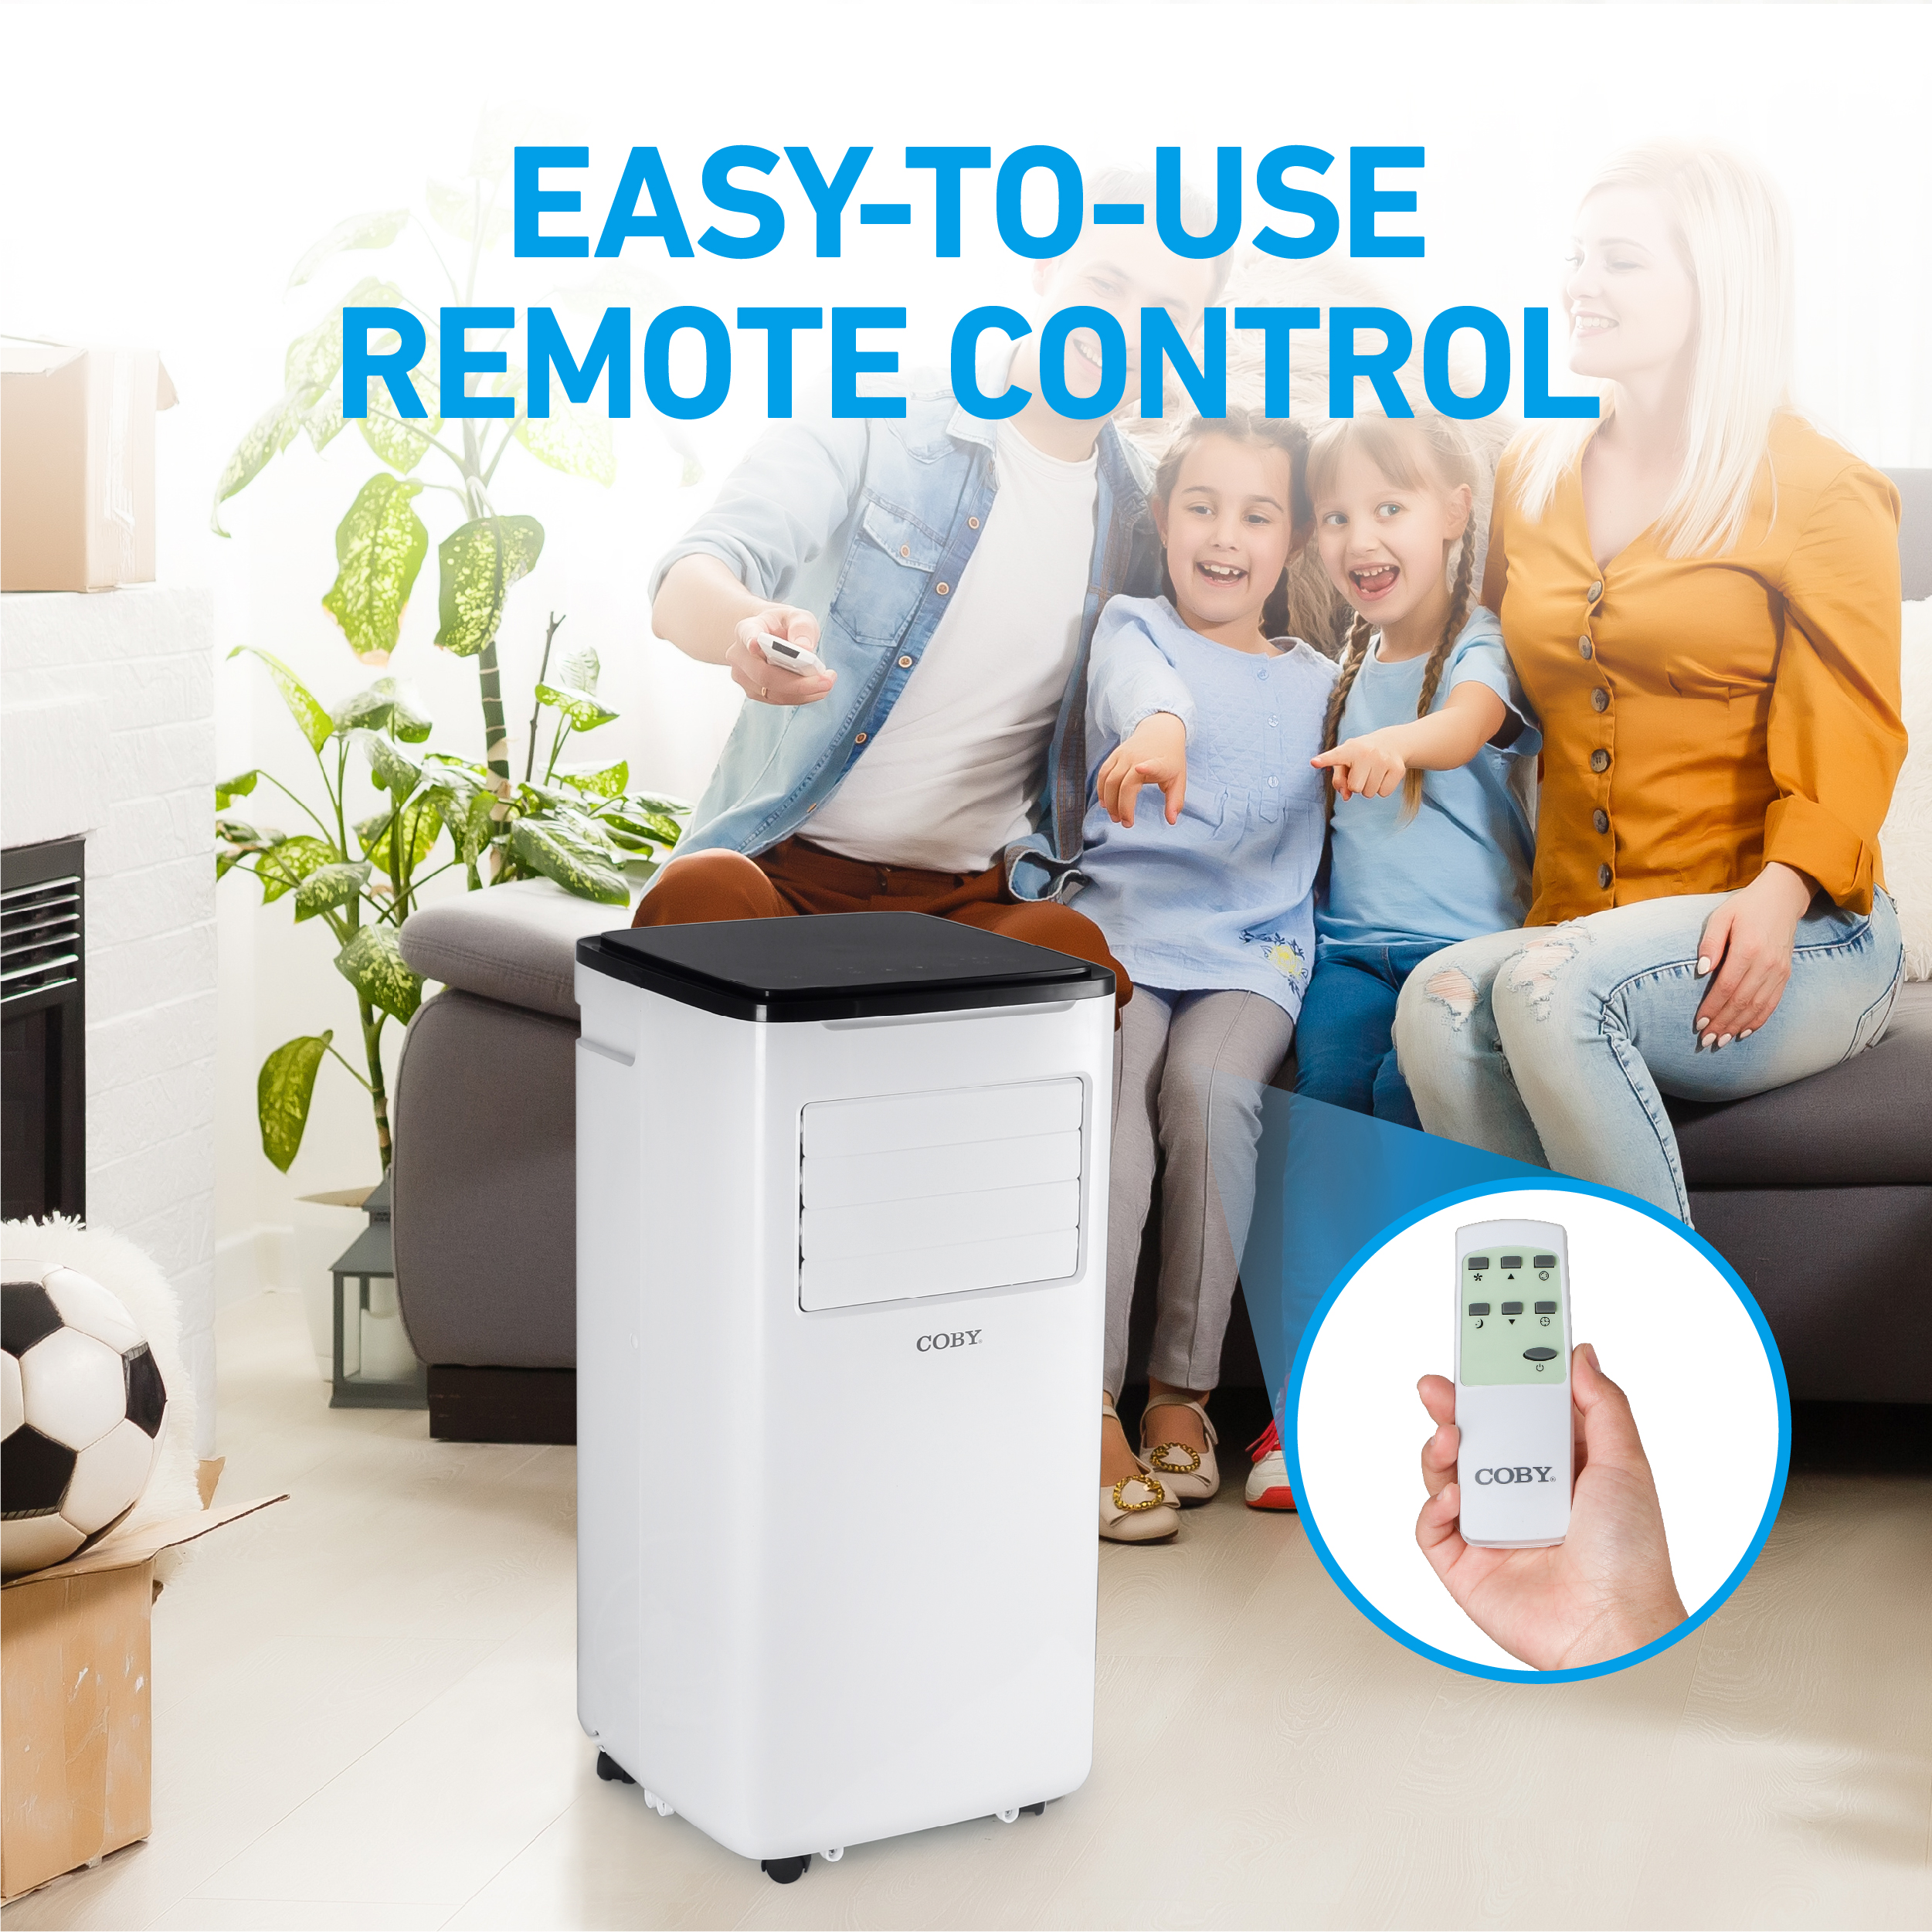 COBY Portable Air Conditioner 3-in-1 AC Unit, Dehumidifier & Fan, Air Conditioner 10,000 BTU Portable AC Unit